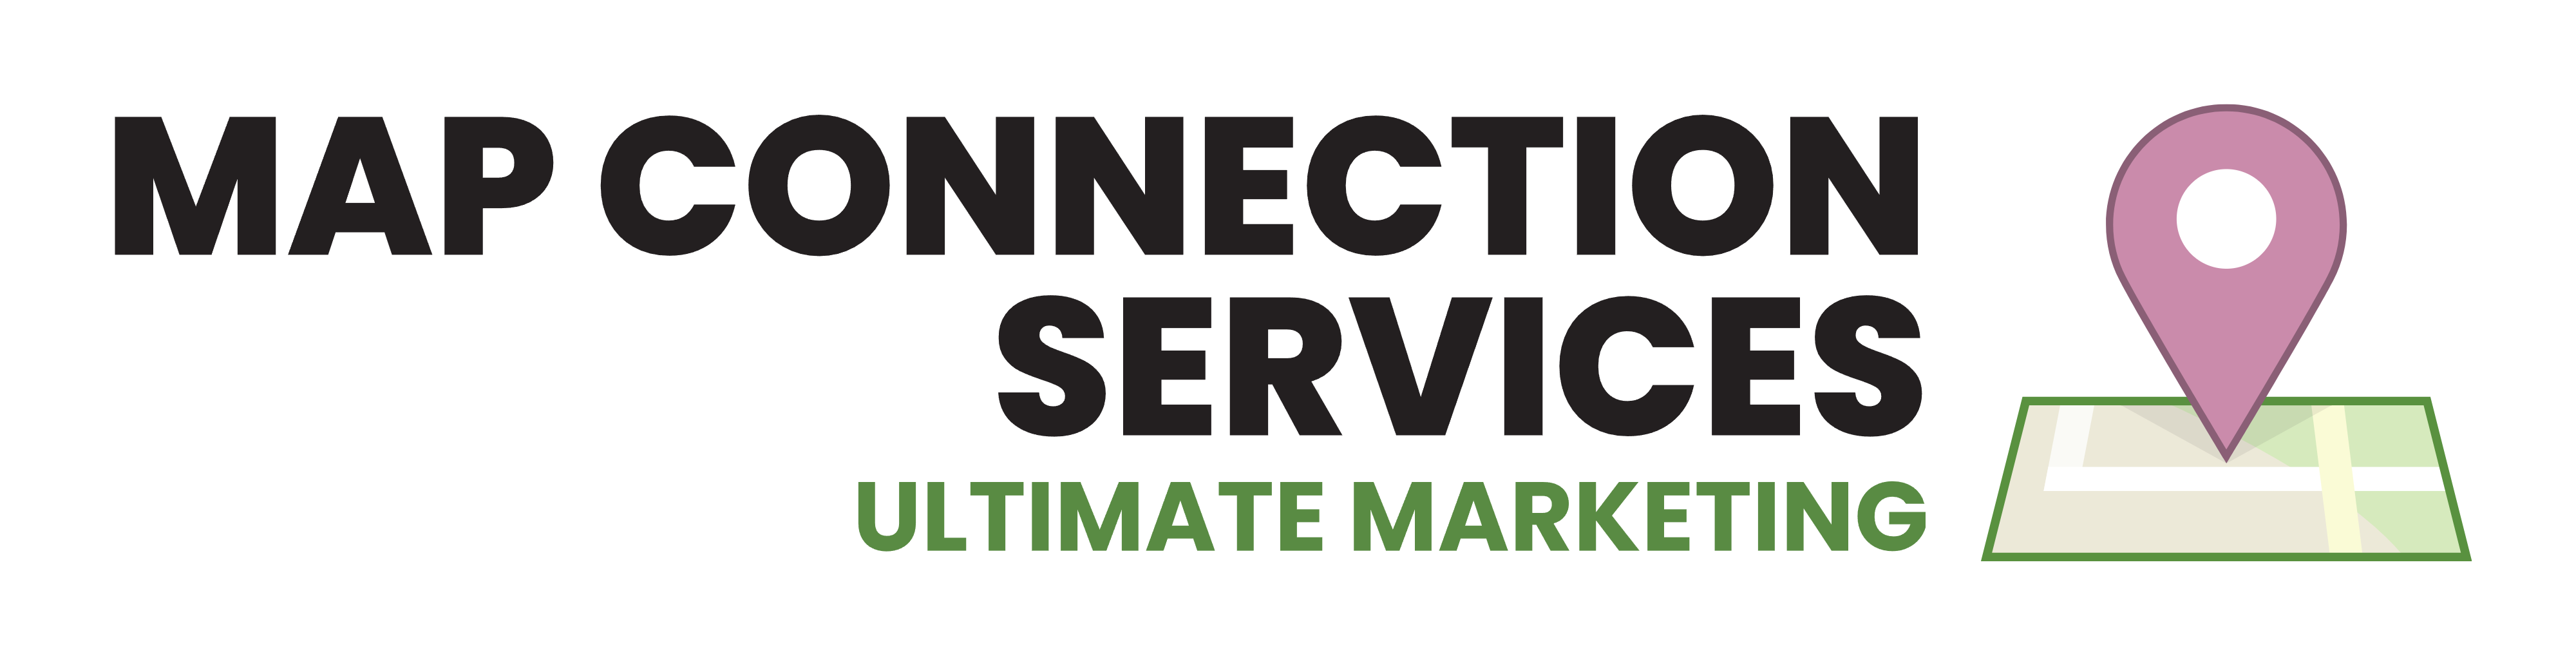 map connection services